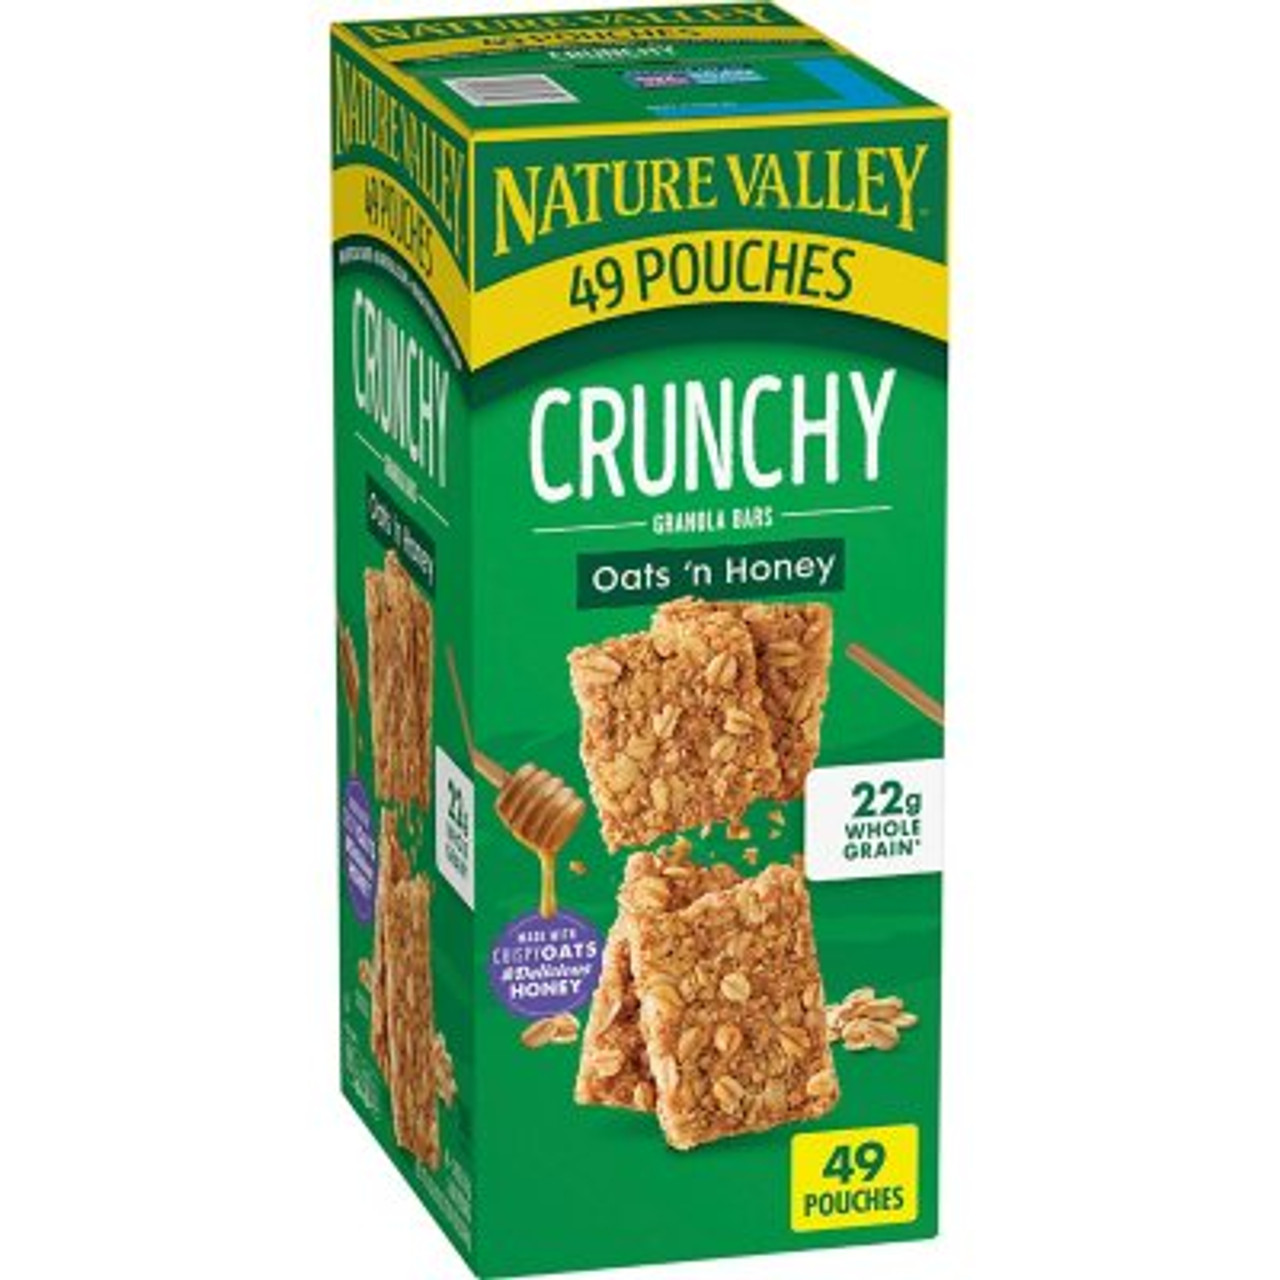 Nature Valley Oats 'n Honey Crunchy Granola Bars (49 pk.) - [From 68.00 - Choose pk Qty ] - *Ships from Miami